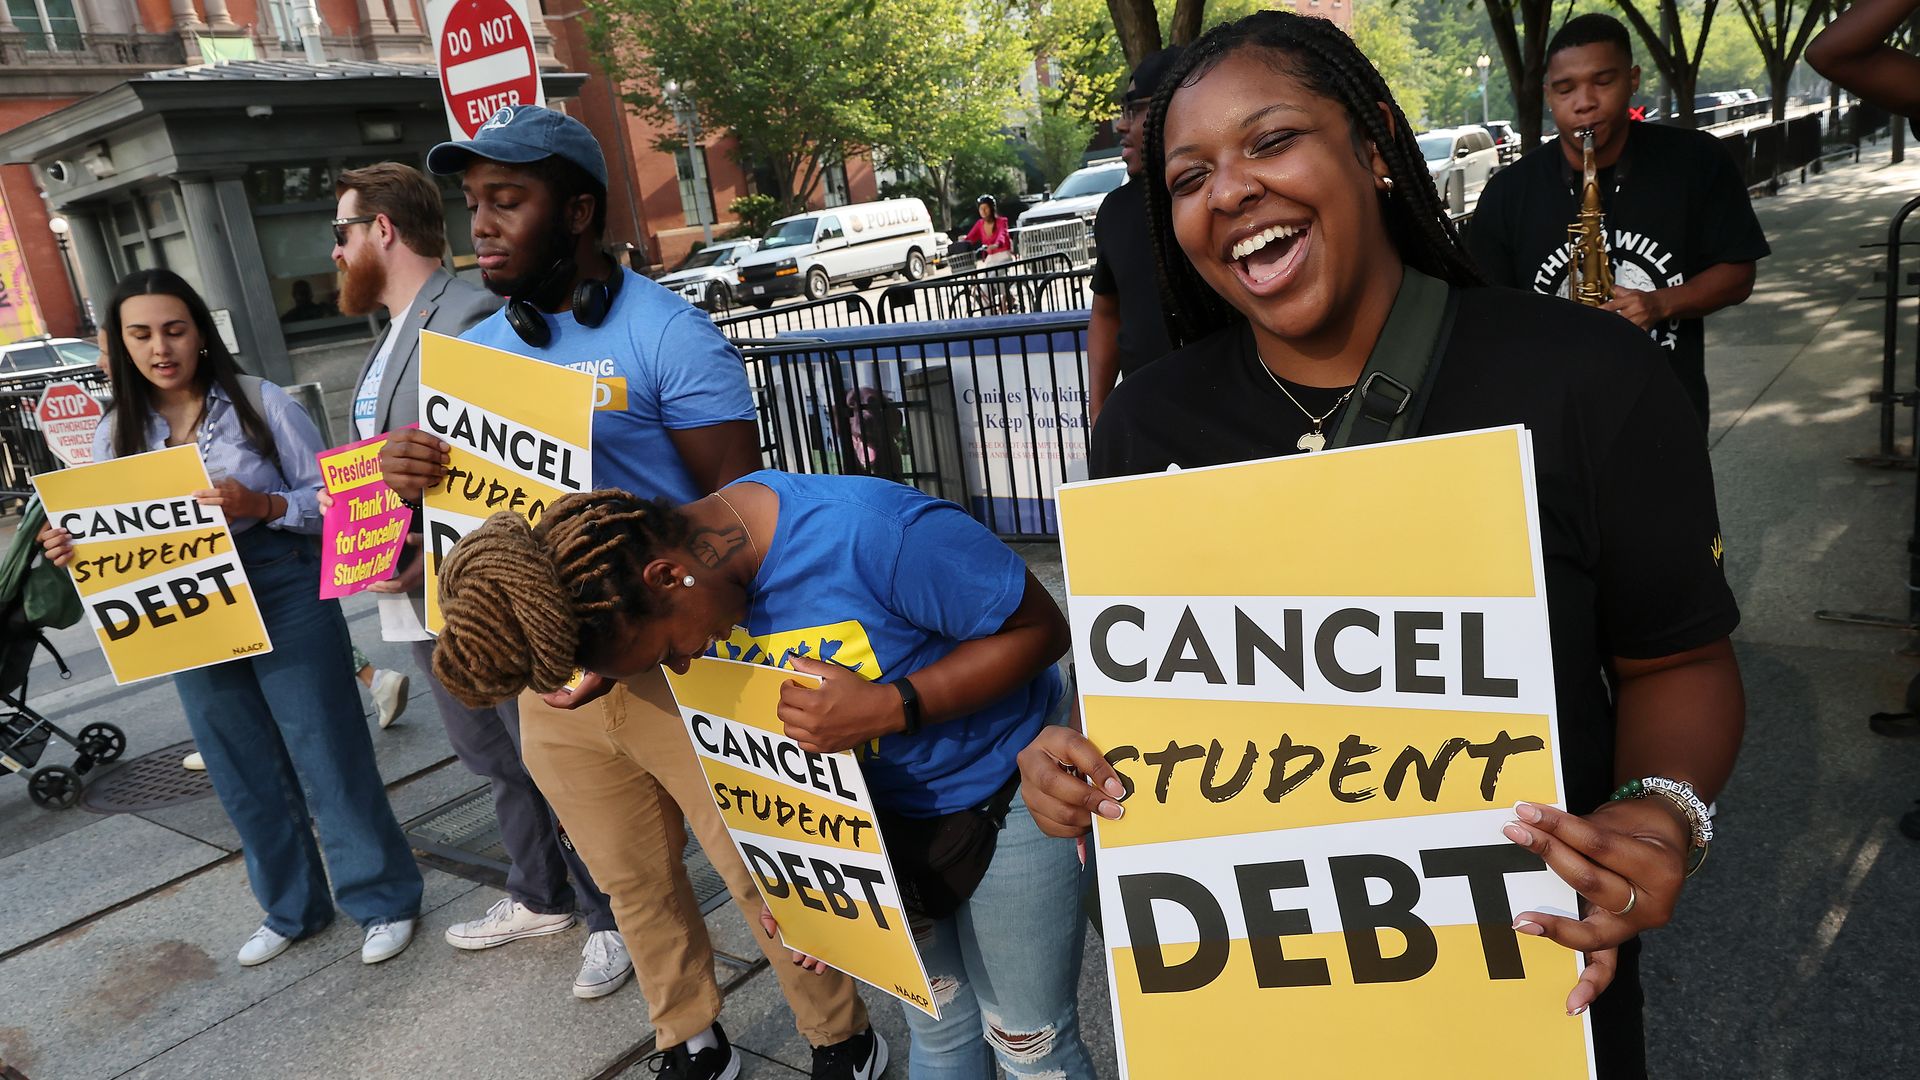 People holding signs that say "Cancel Student Debit"